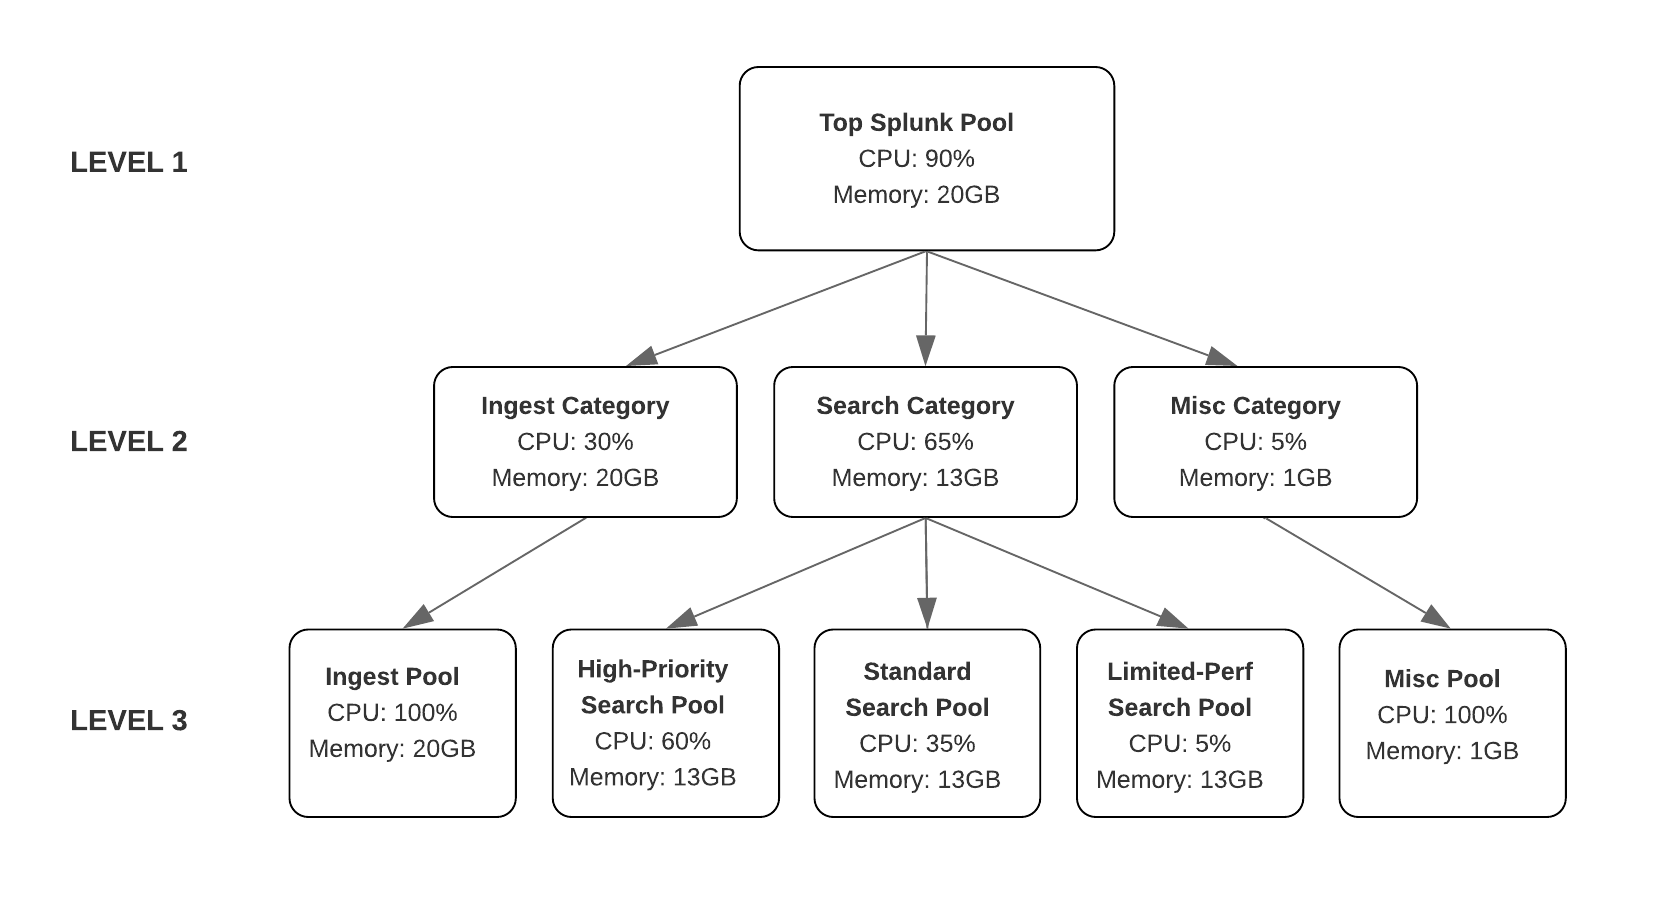 The diagram shows the allocation of CPU and memory resources as a hierarchical tree with three levels. The amount of available CPU and memory is progressively distributed from the Top Splunk Pool to workload categories, and from workload categories to workload pools, from top to bottom.